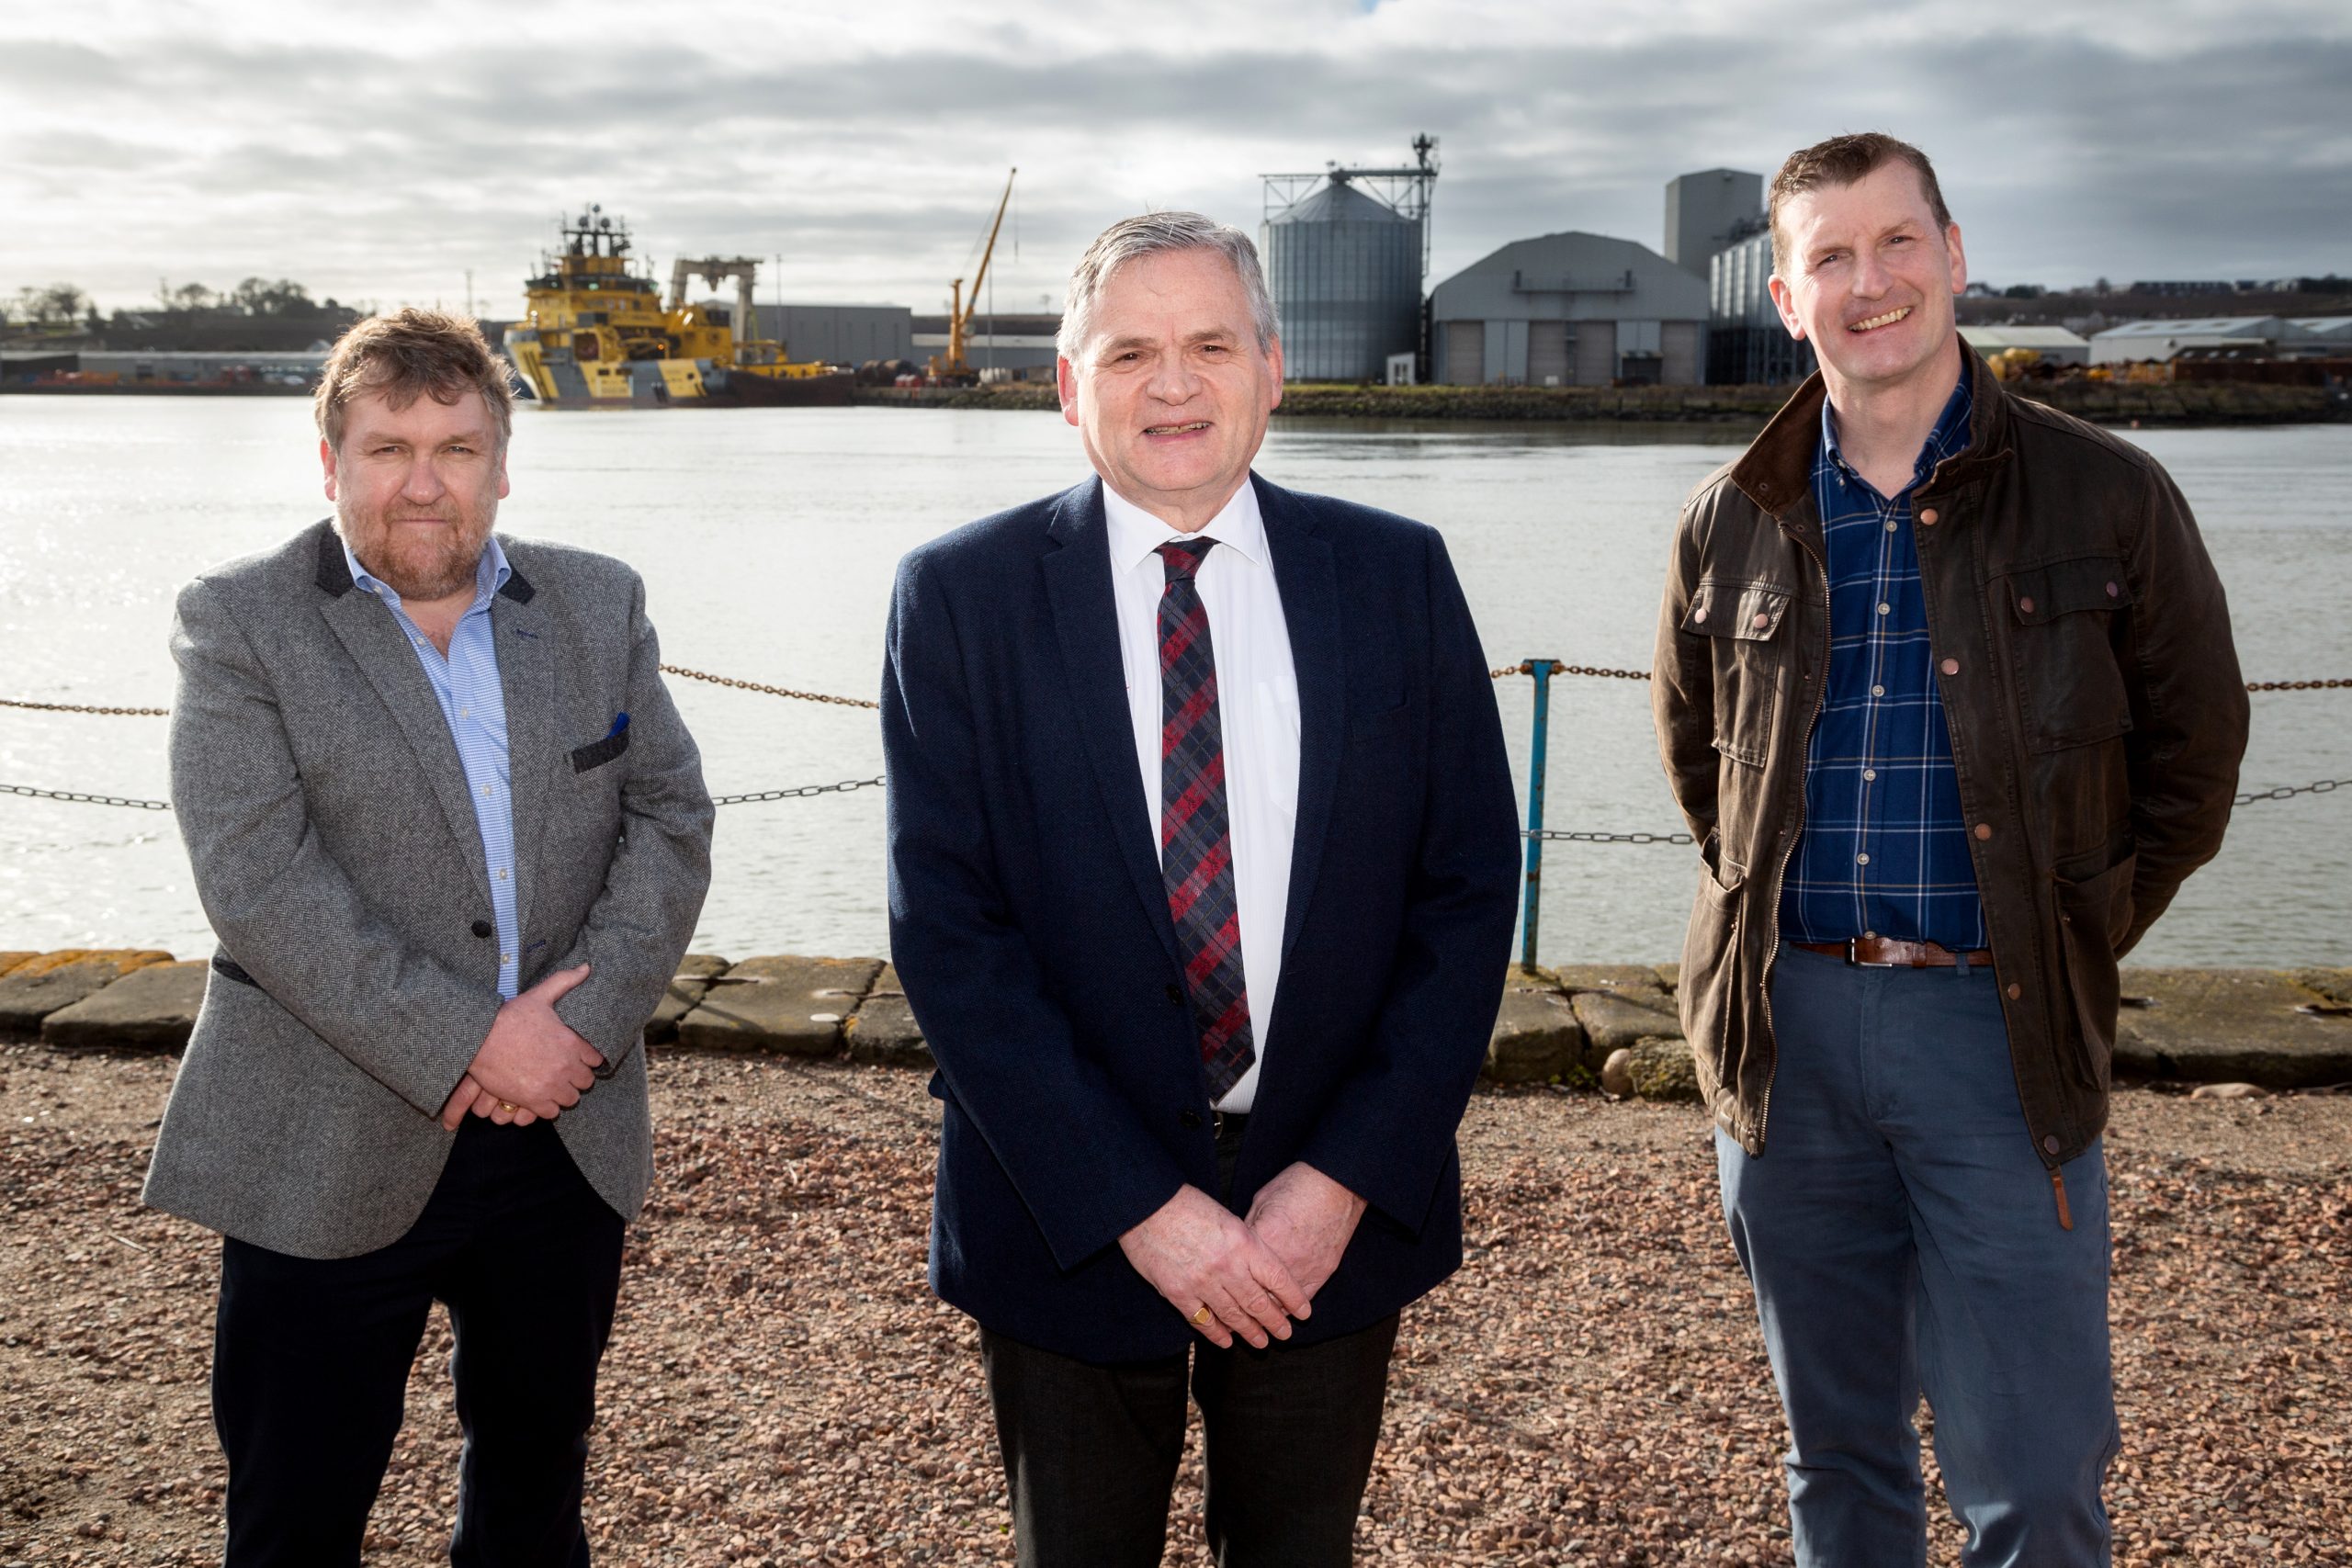 Featured image for “Balmoral brings jobs boost to Montrose with new quayside facility”